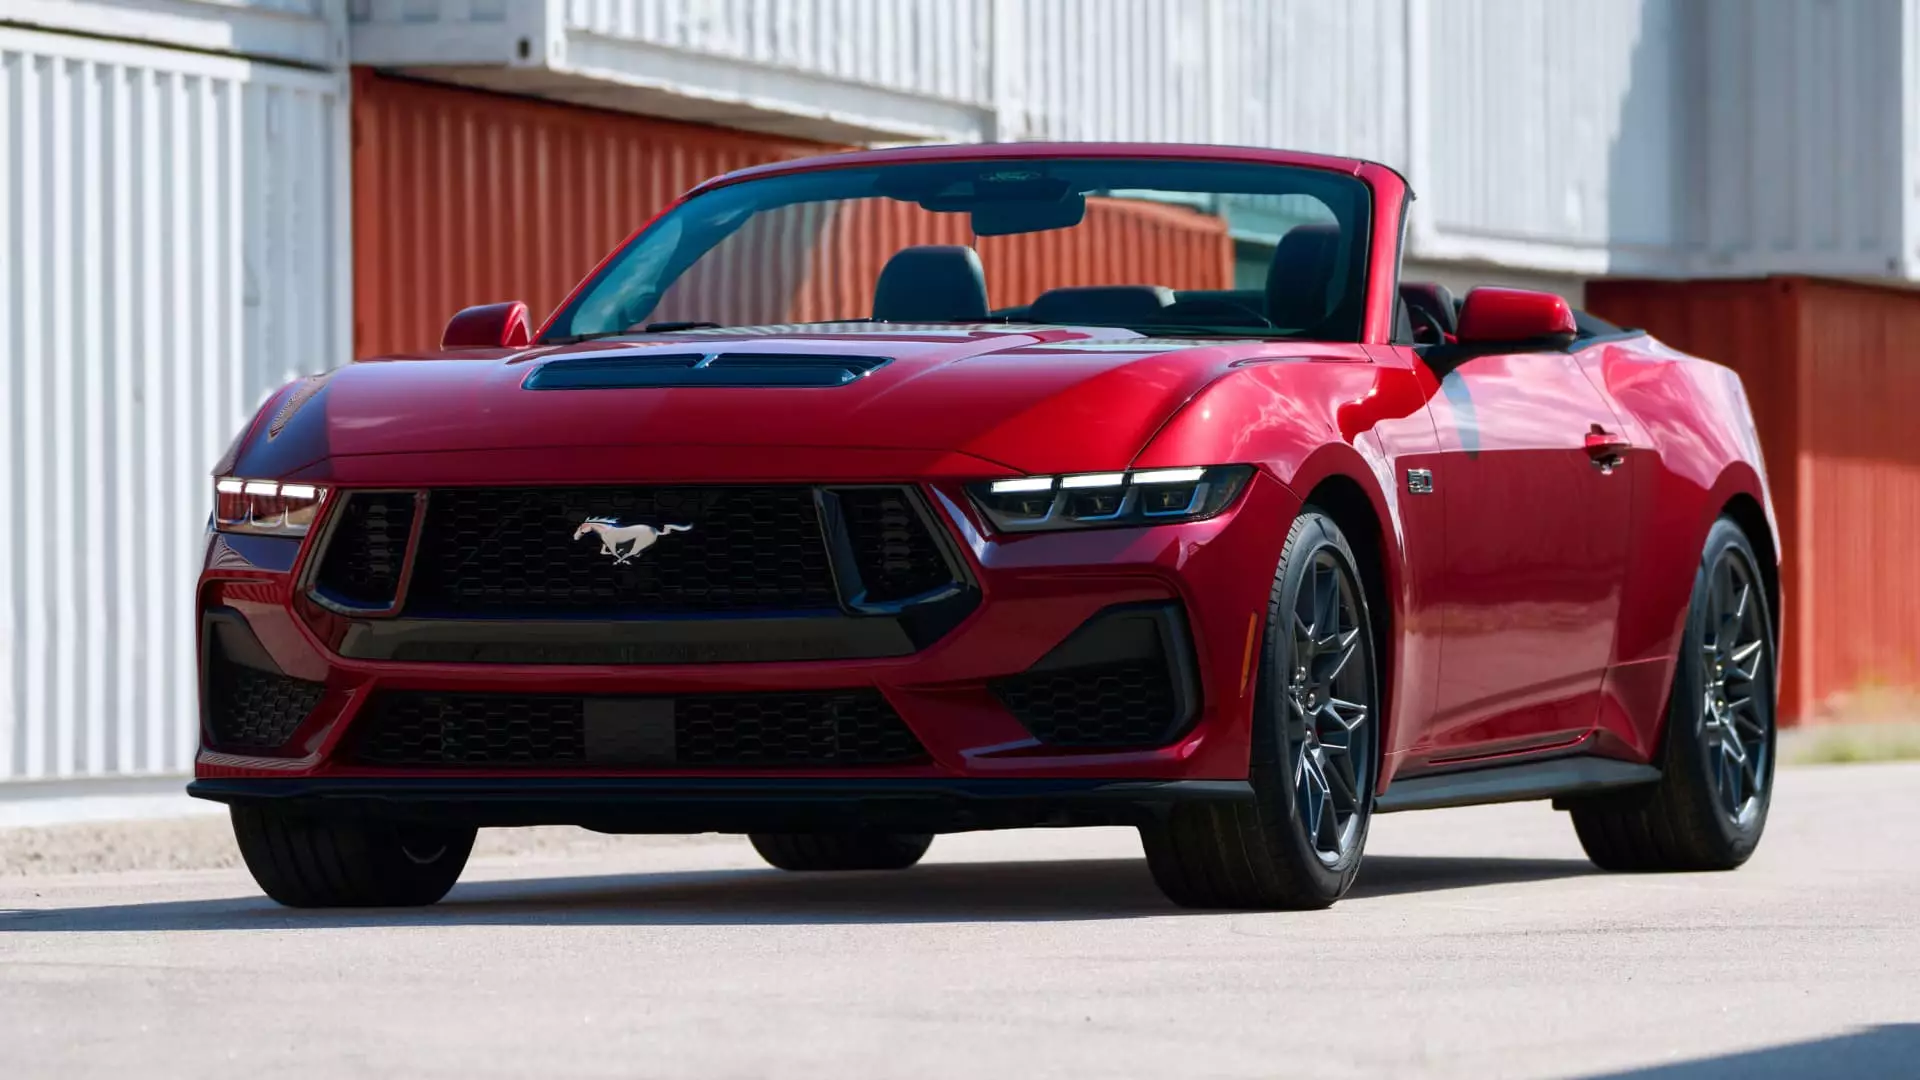 Ford Sees Opportunity to Increase Mustang Sales as Last American Muscle Car with Traditional V8 Engine